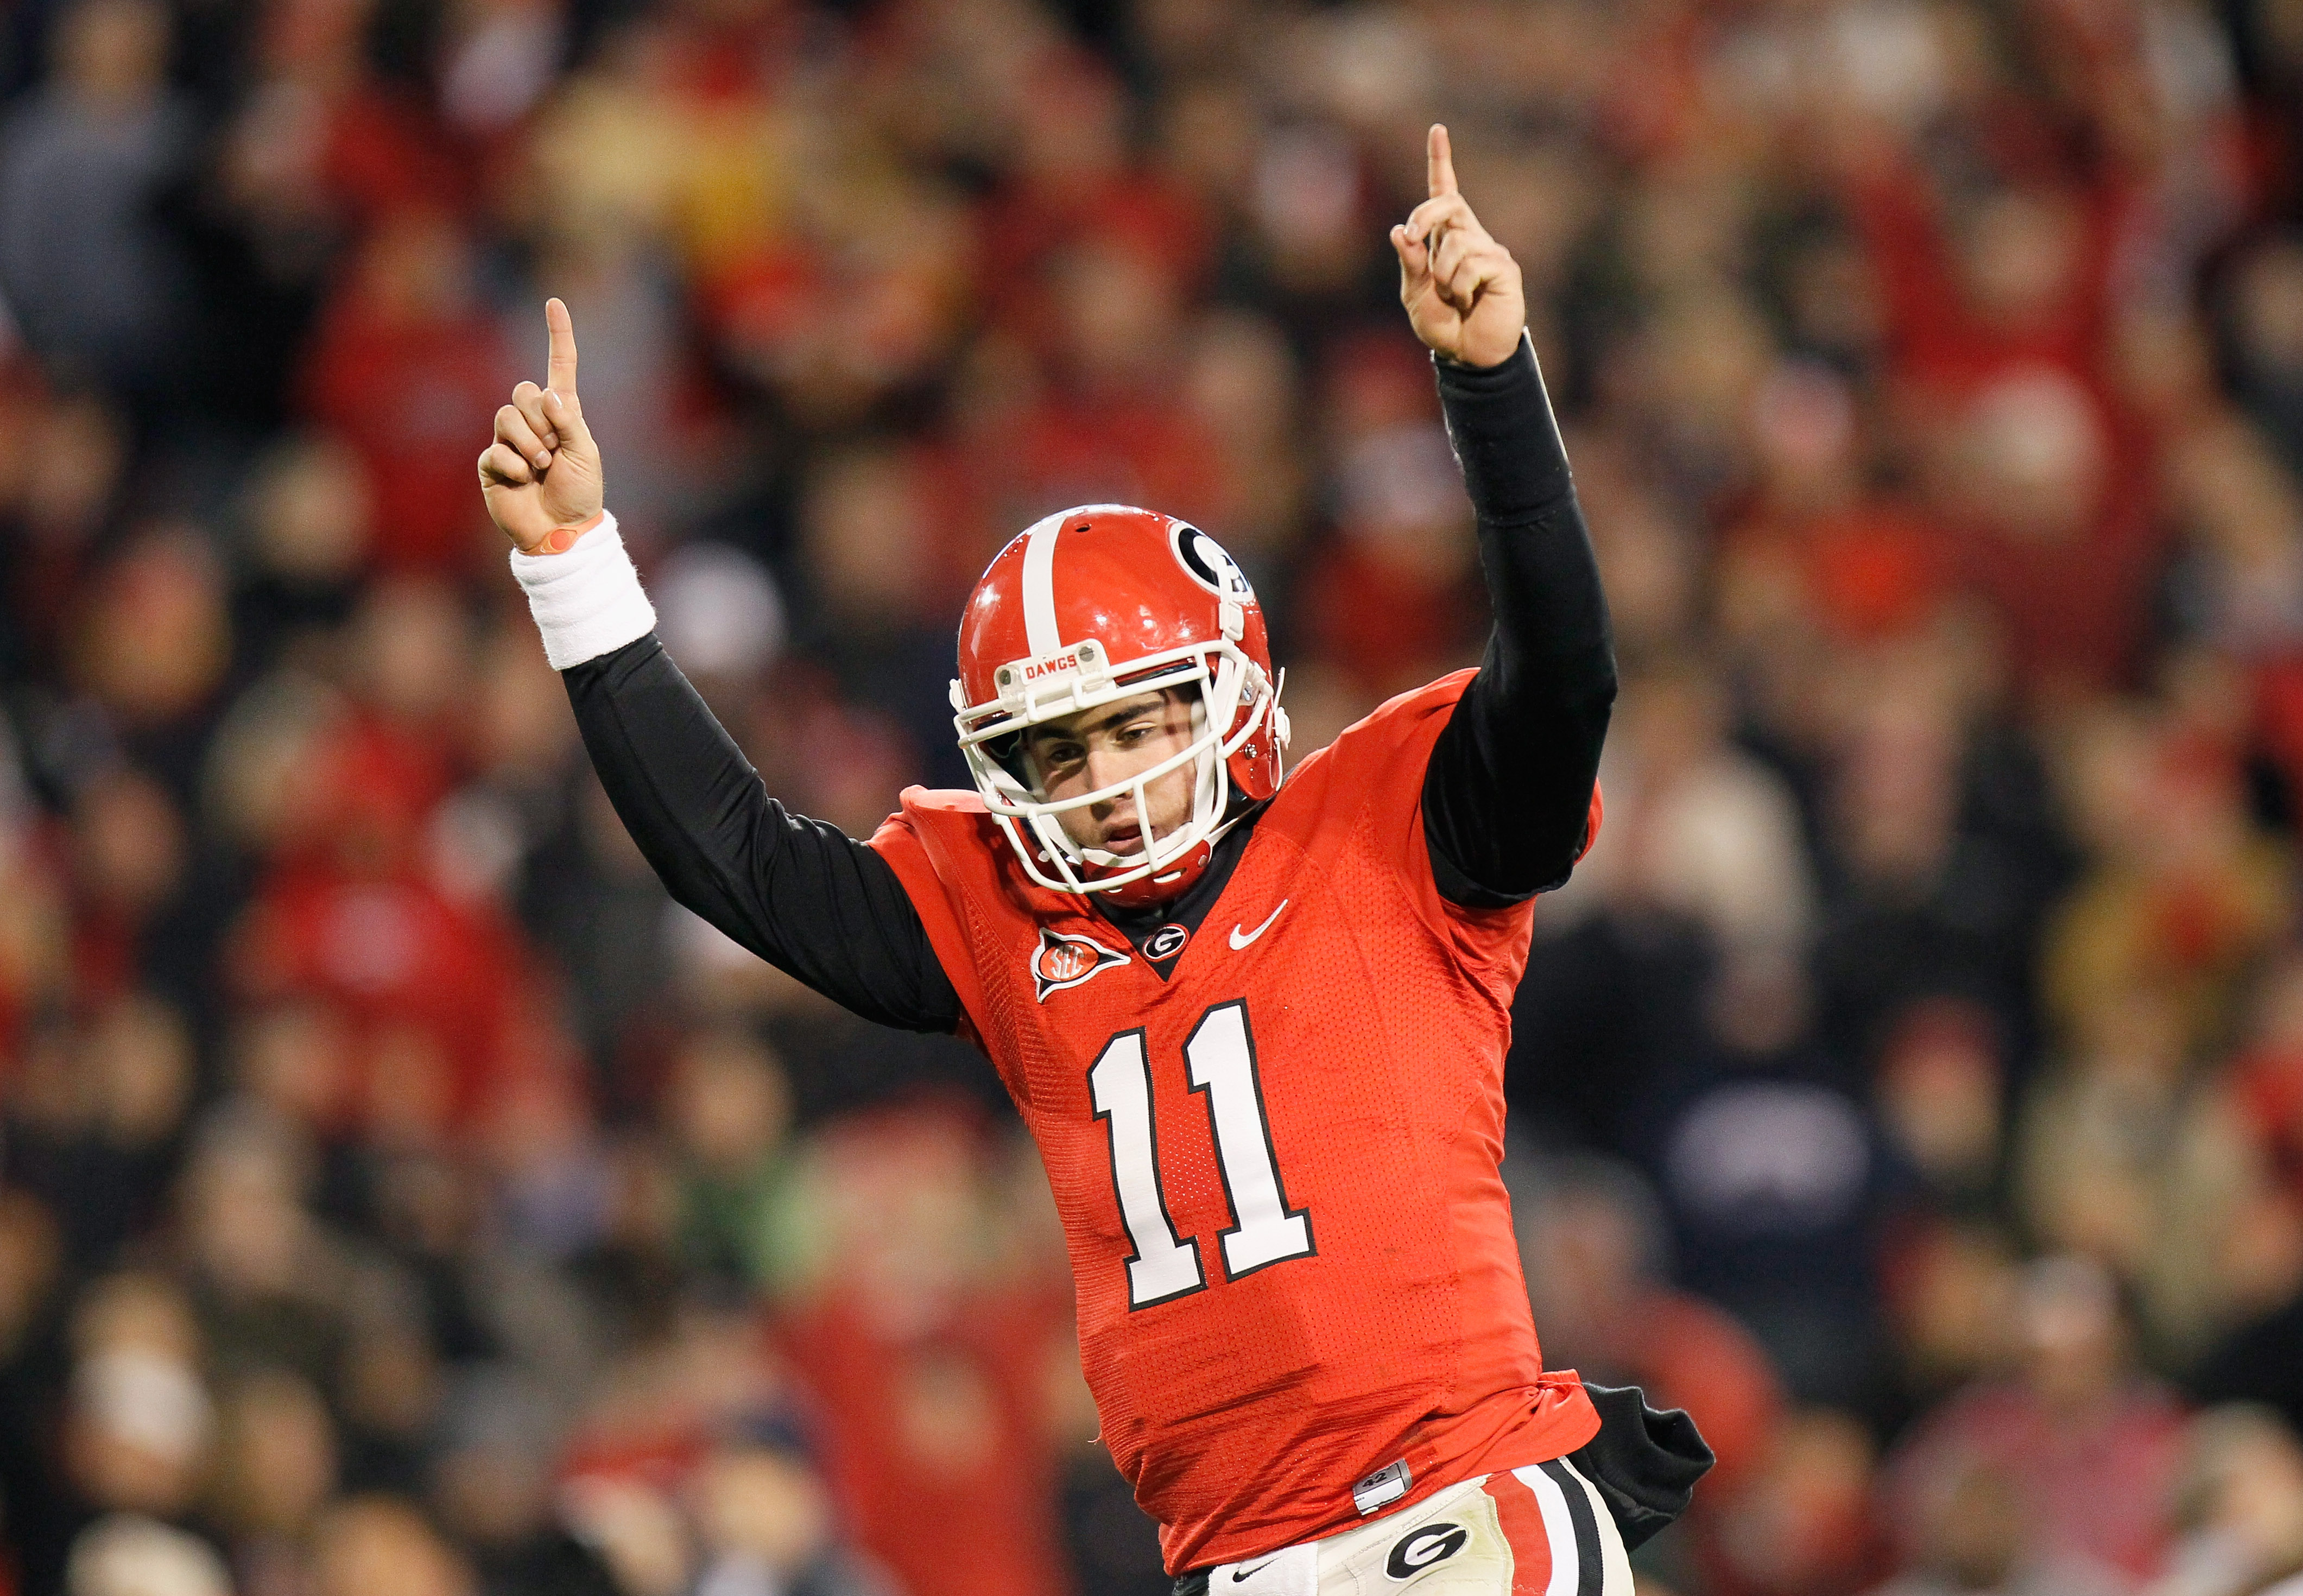 ATHENS, GA - NOVEMBER 27:  Quarterback Aaron Murray #11 of the Georgia Bulldogs reacts after scoring a touchdown against the Georgia Tech Yellow Jackets at Sanford Stadium on November 27, 2010 in Athens, Georgia.  (Photo by Kevin C. Cox/Getty Images)